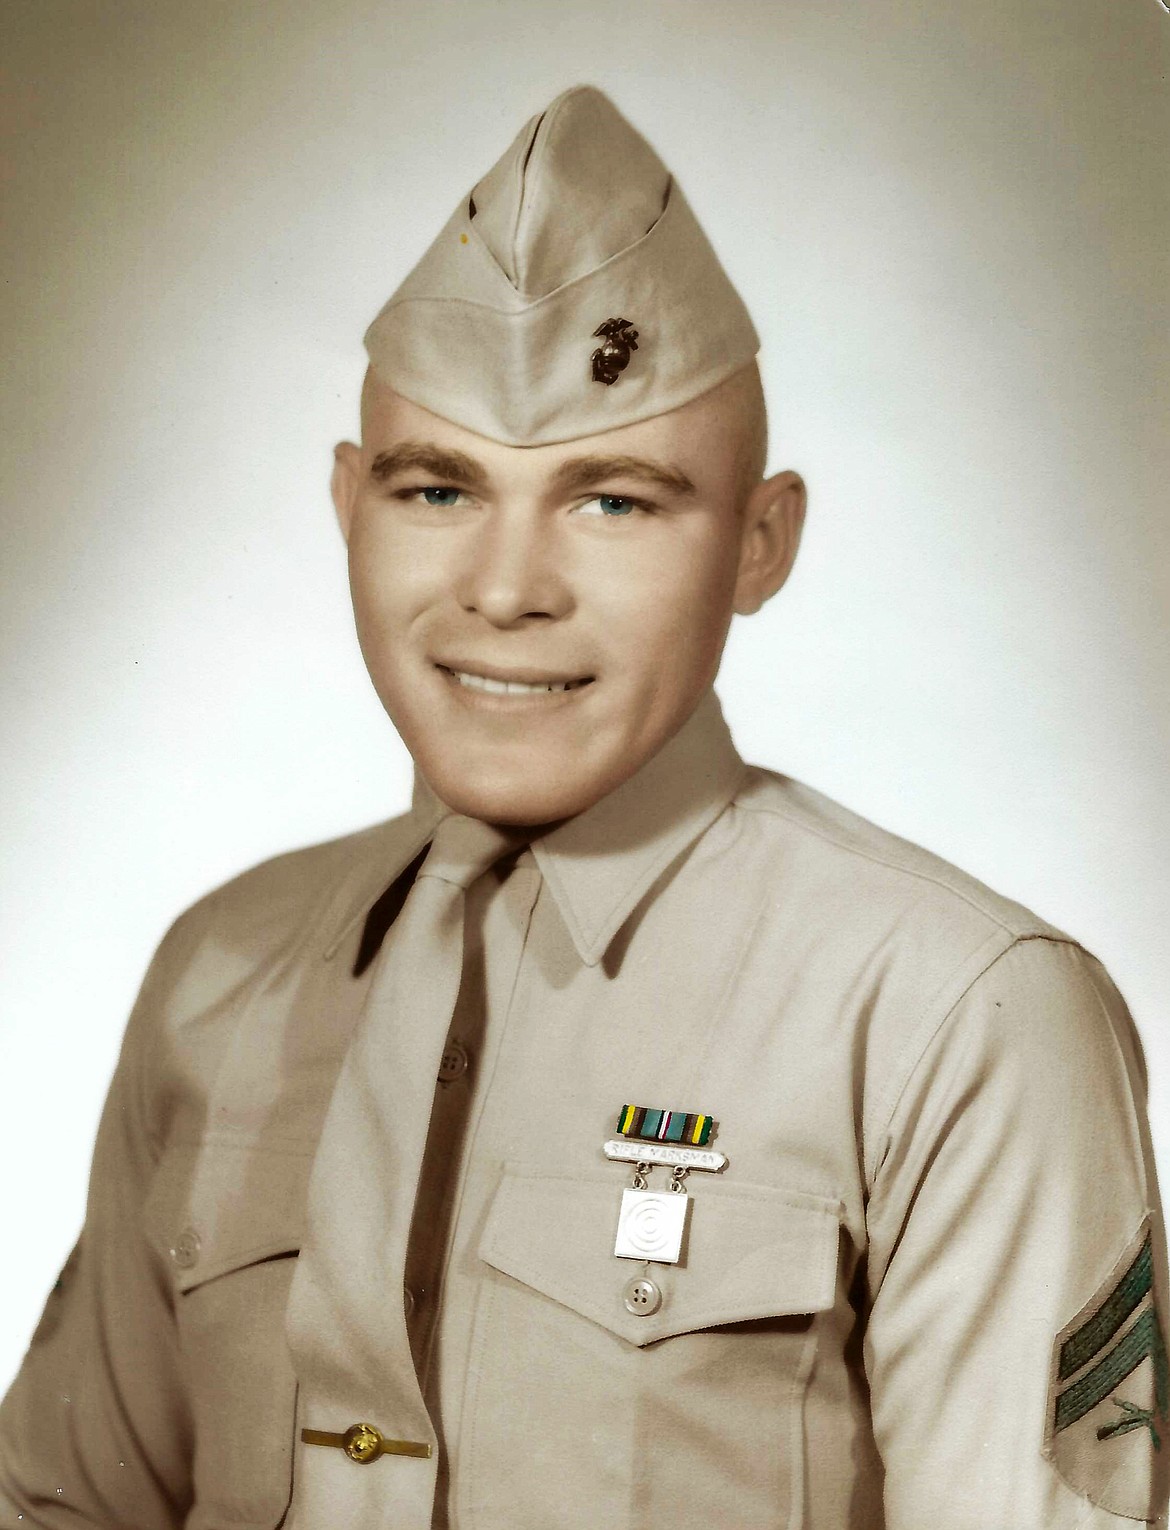 Ronald Williams as a young Marine.